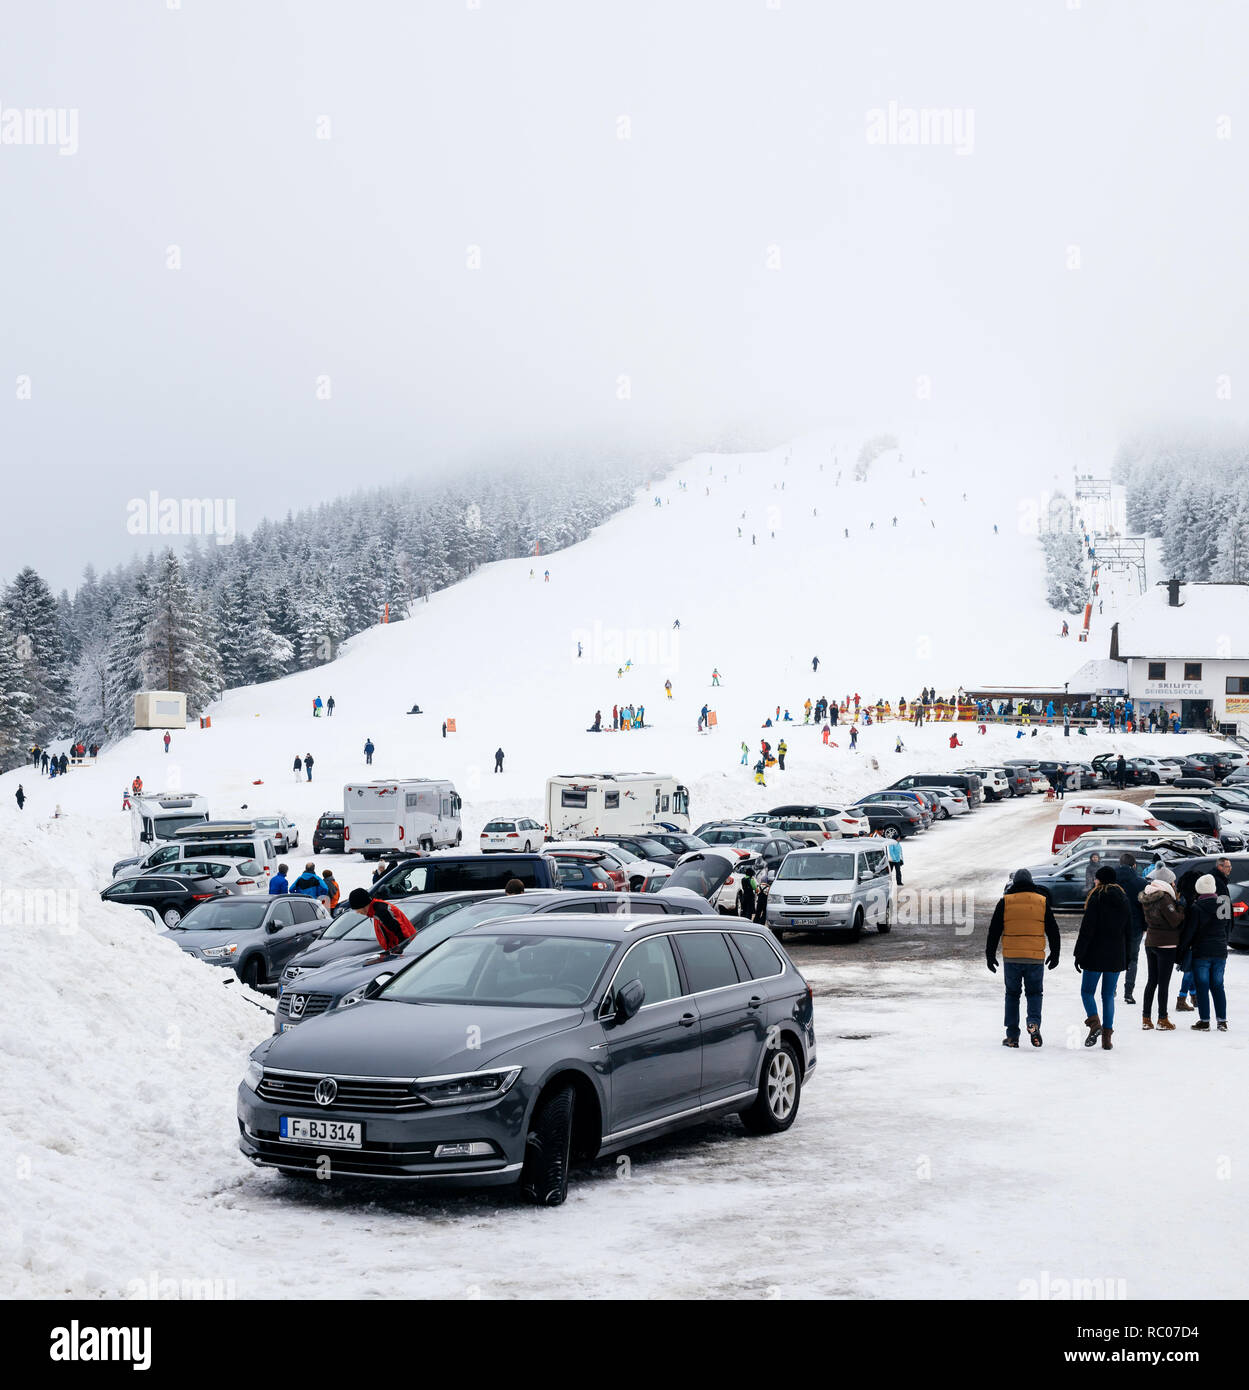 MUMMELSEE, GERMANY - FEB 18, 2018: Winter day with snow and ski slope seen from parking area with kids, parents having fun in German mountains and Volkswagen Passat estate car parked Stock Photo